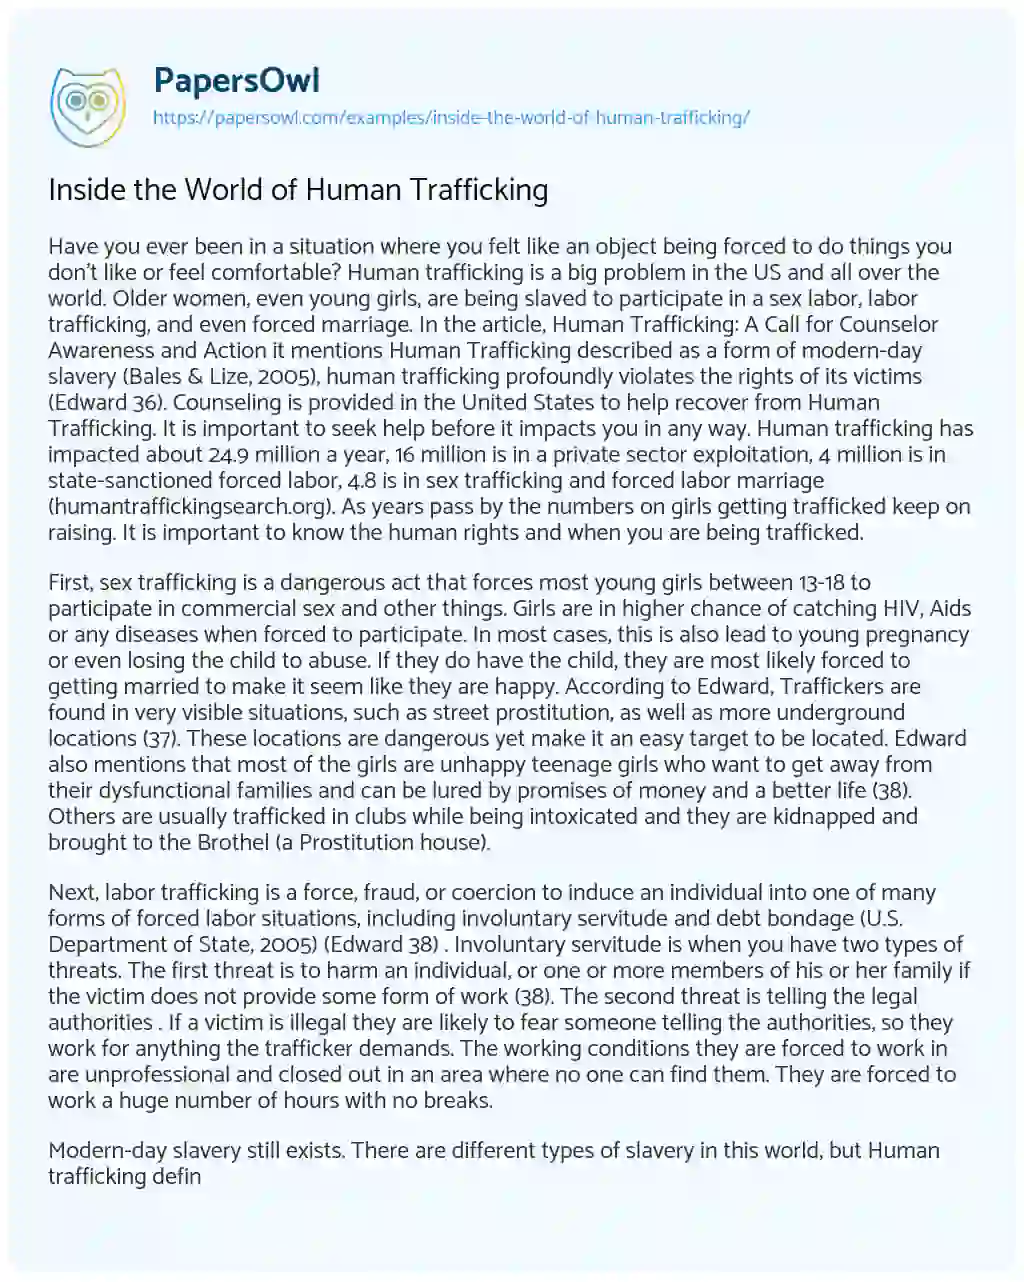 Essay on Inside the World of Human Trafficking